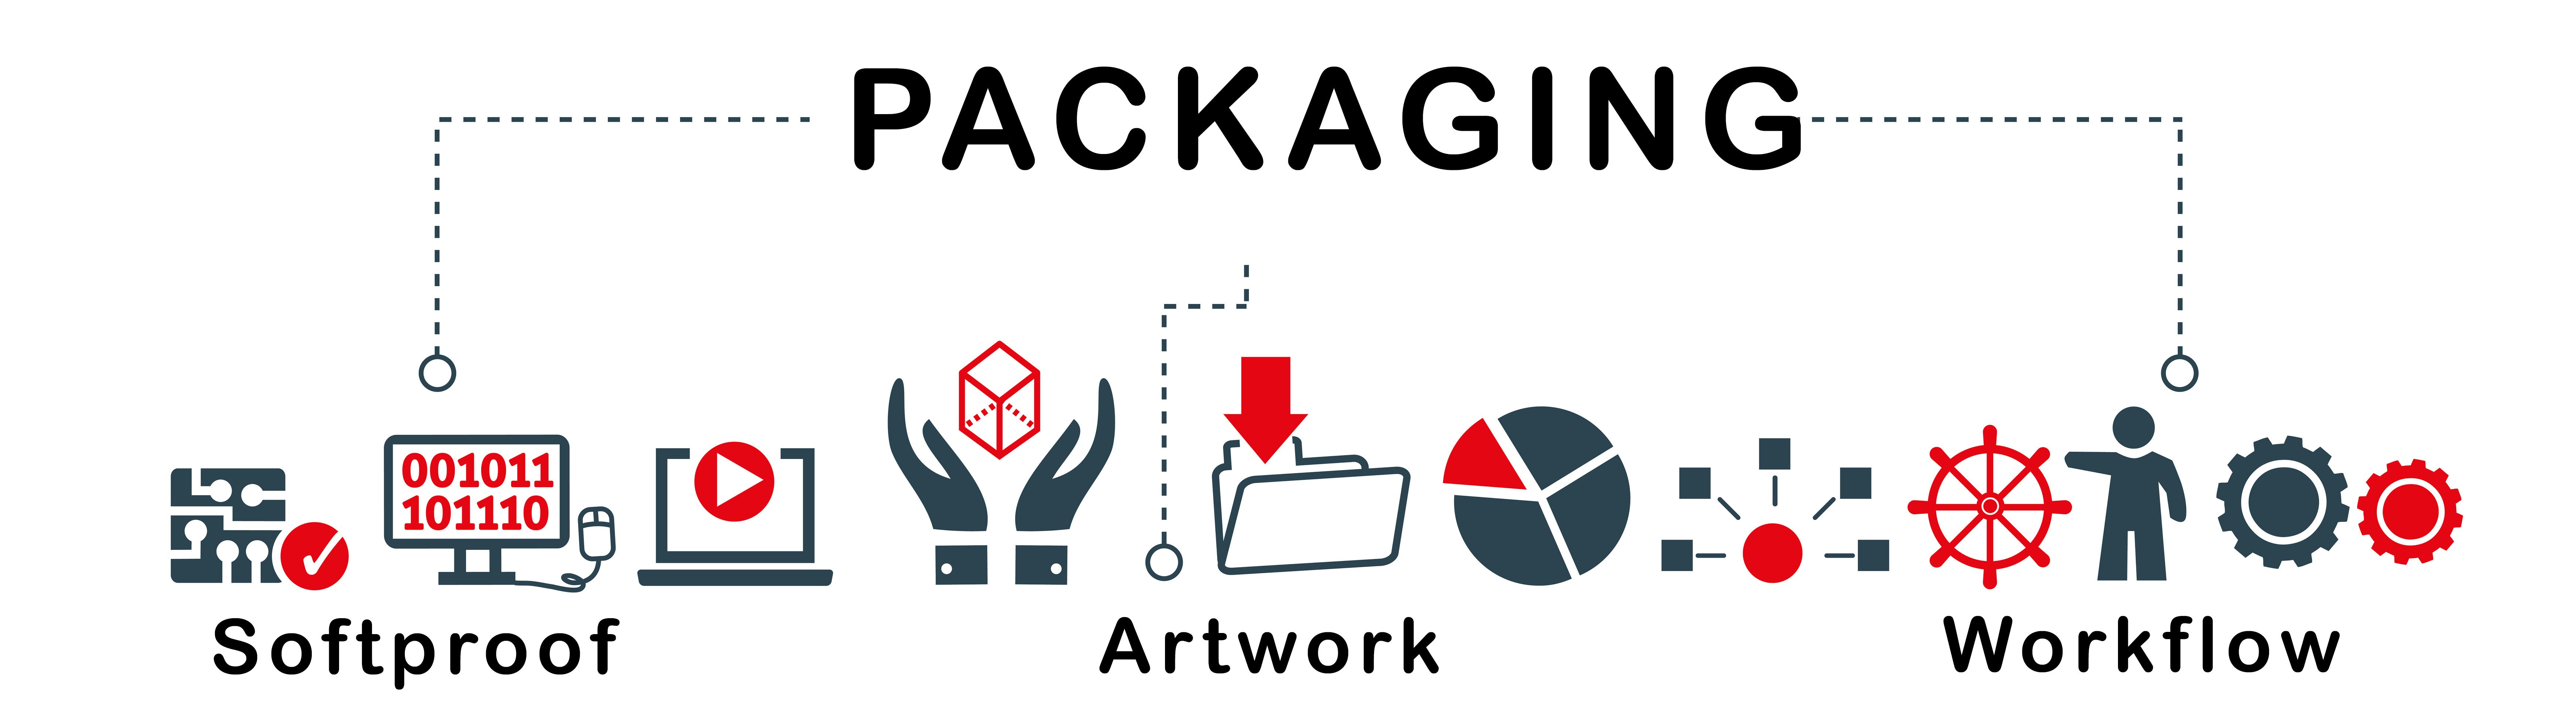 packaging infographie